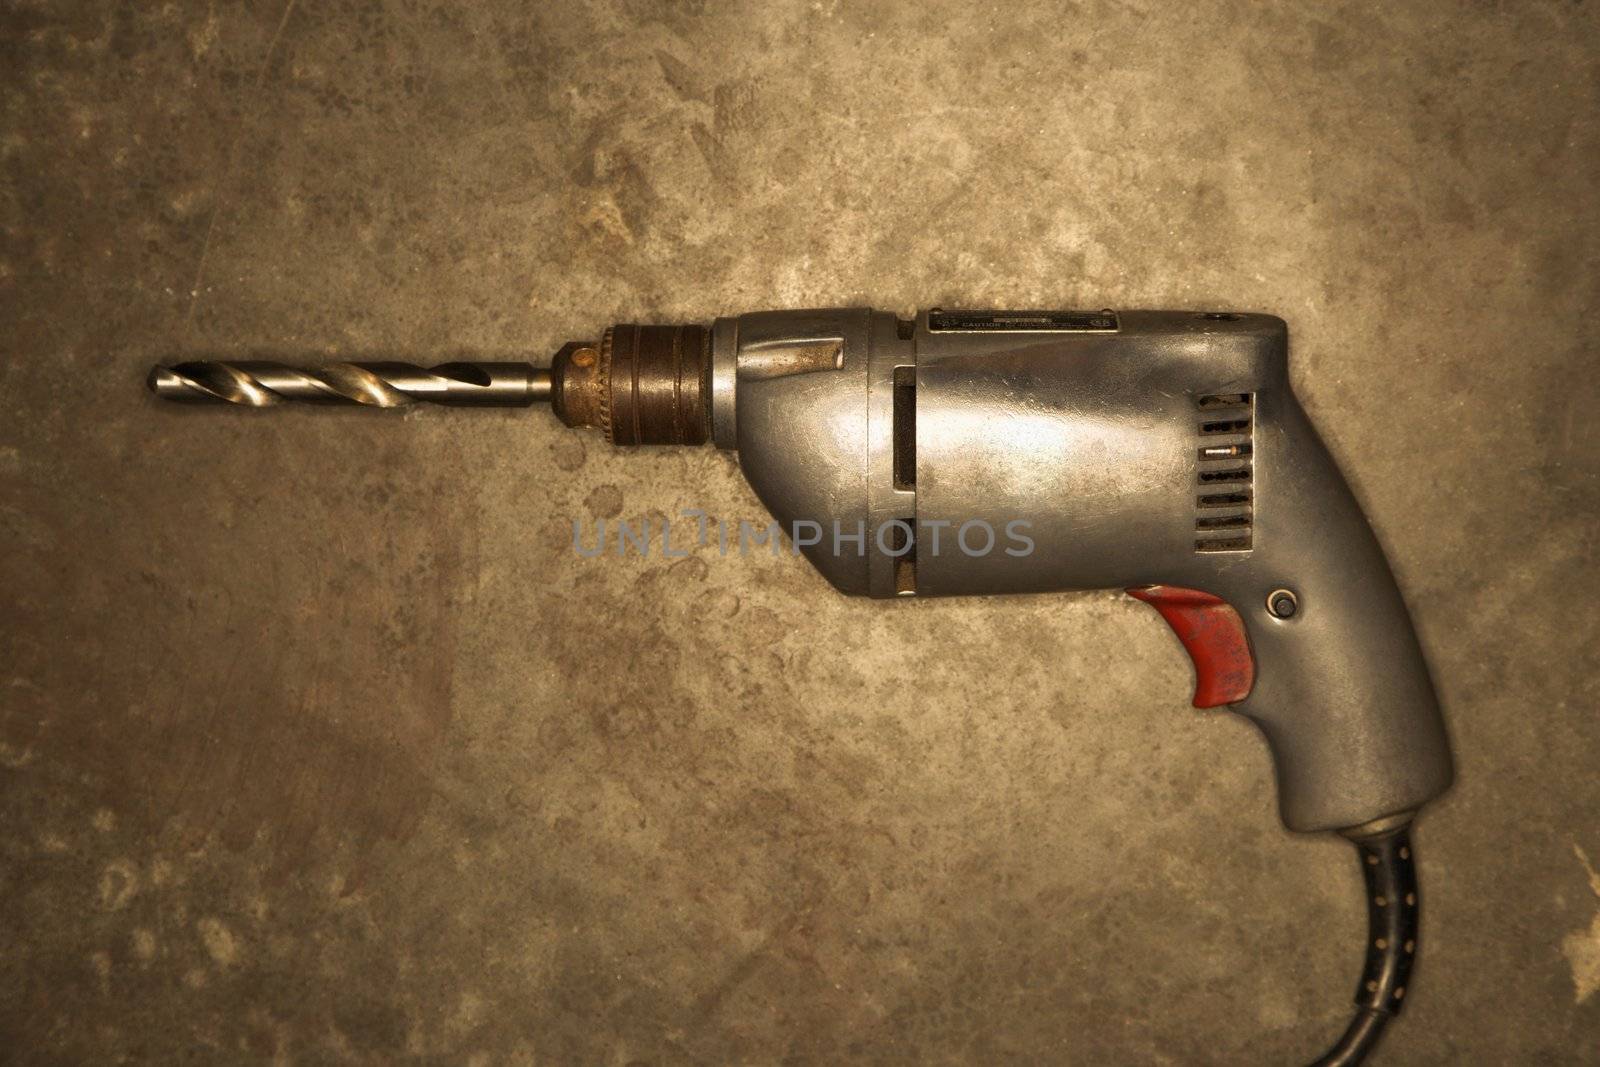 Electric drill resting on cement floor.